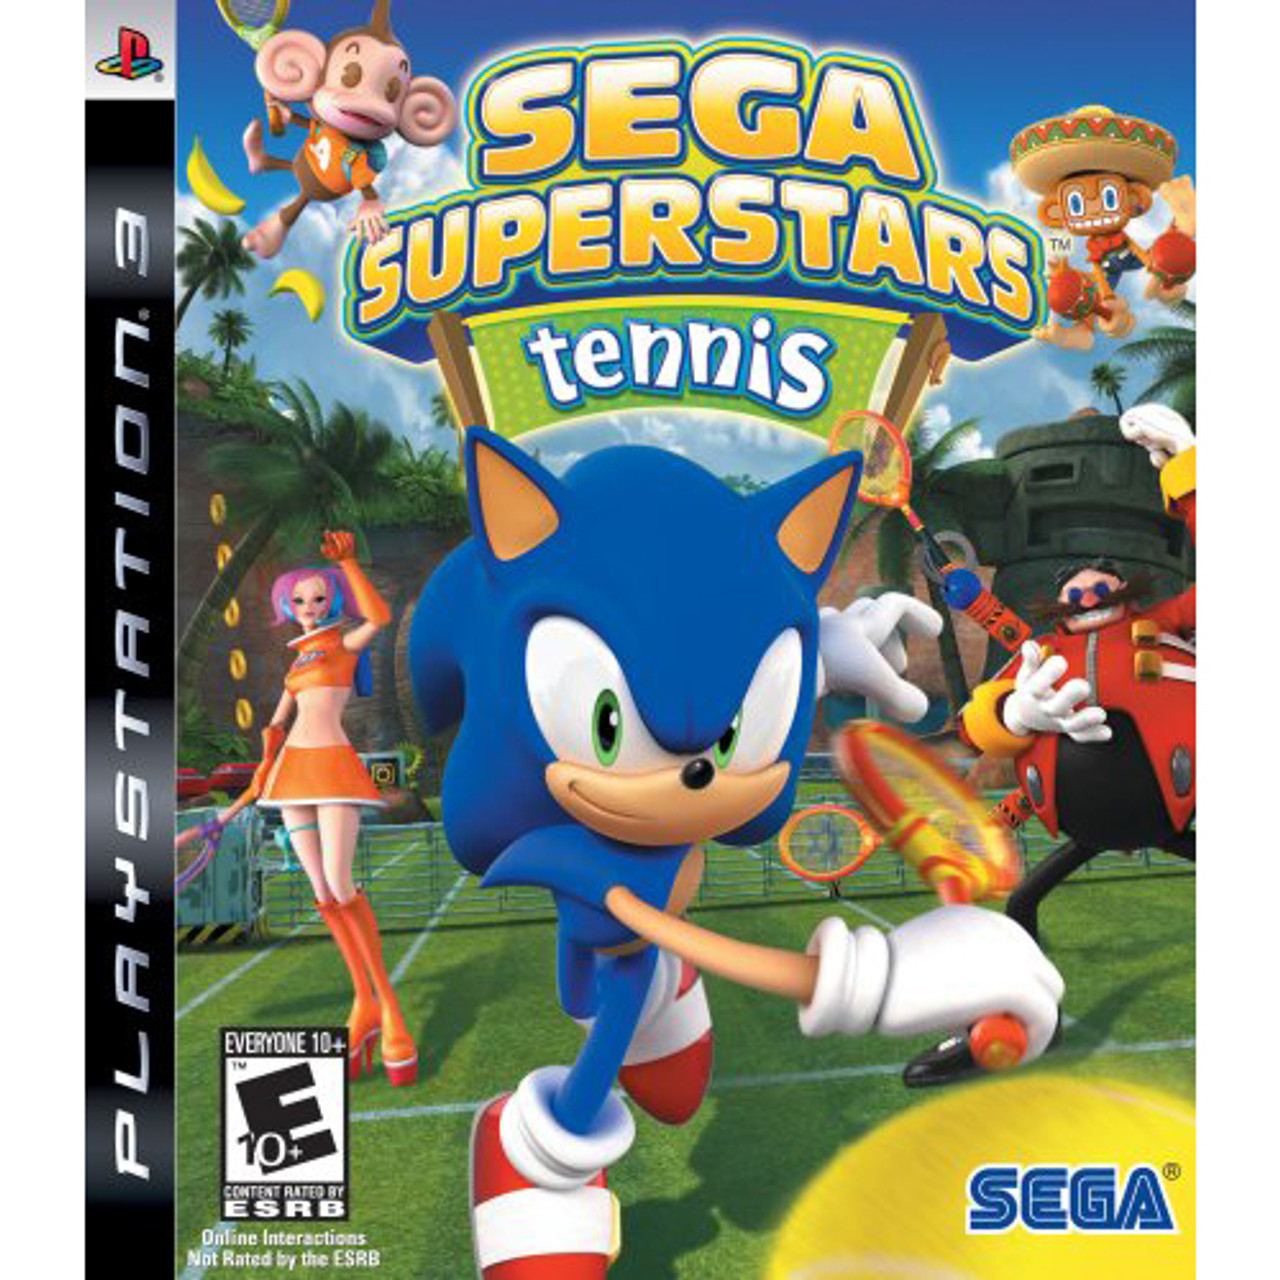 SEGA: Sonic The Hedgehog Game - PS3 Complete W/ Manual